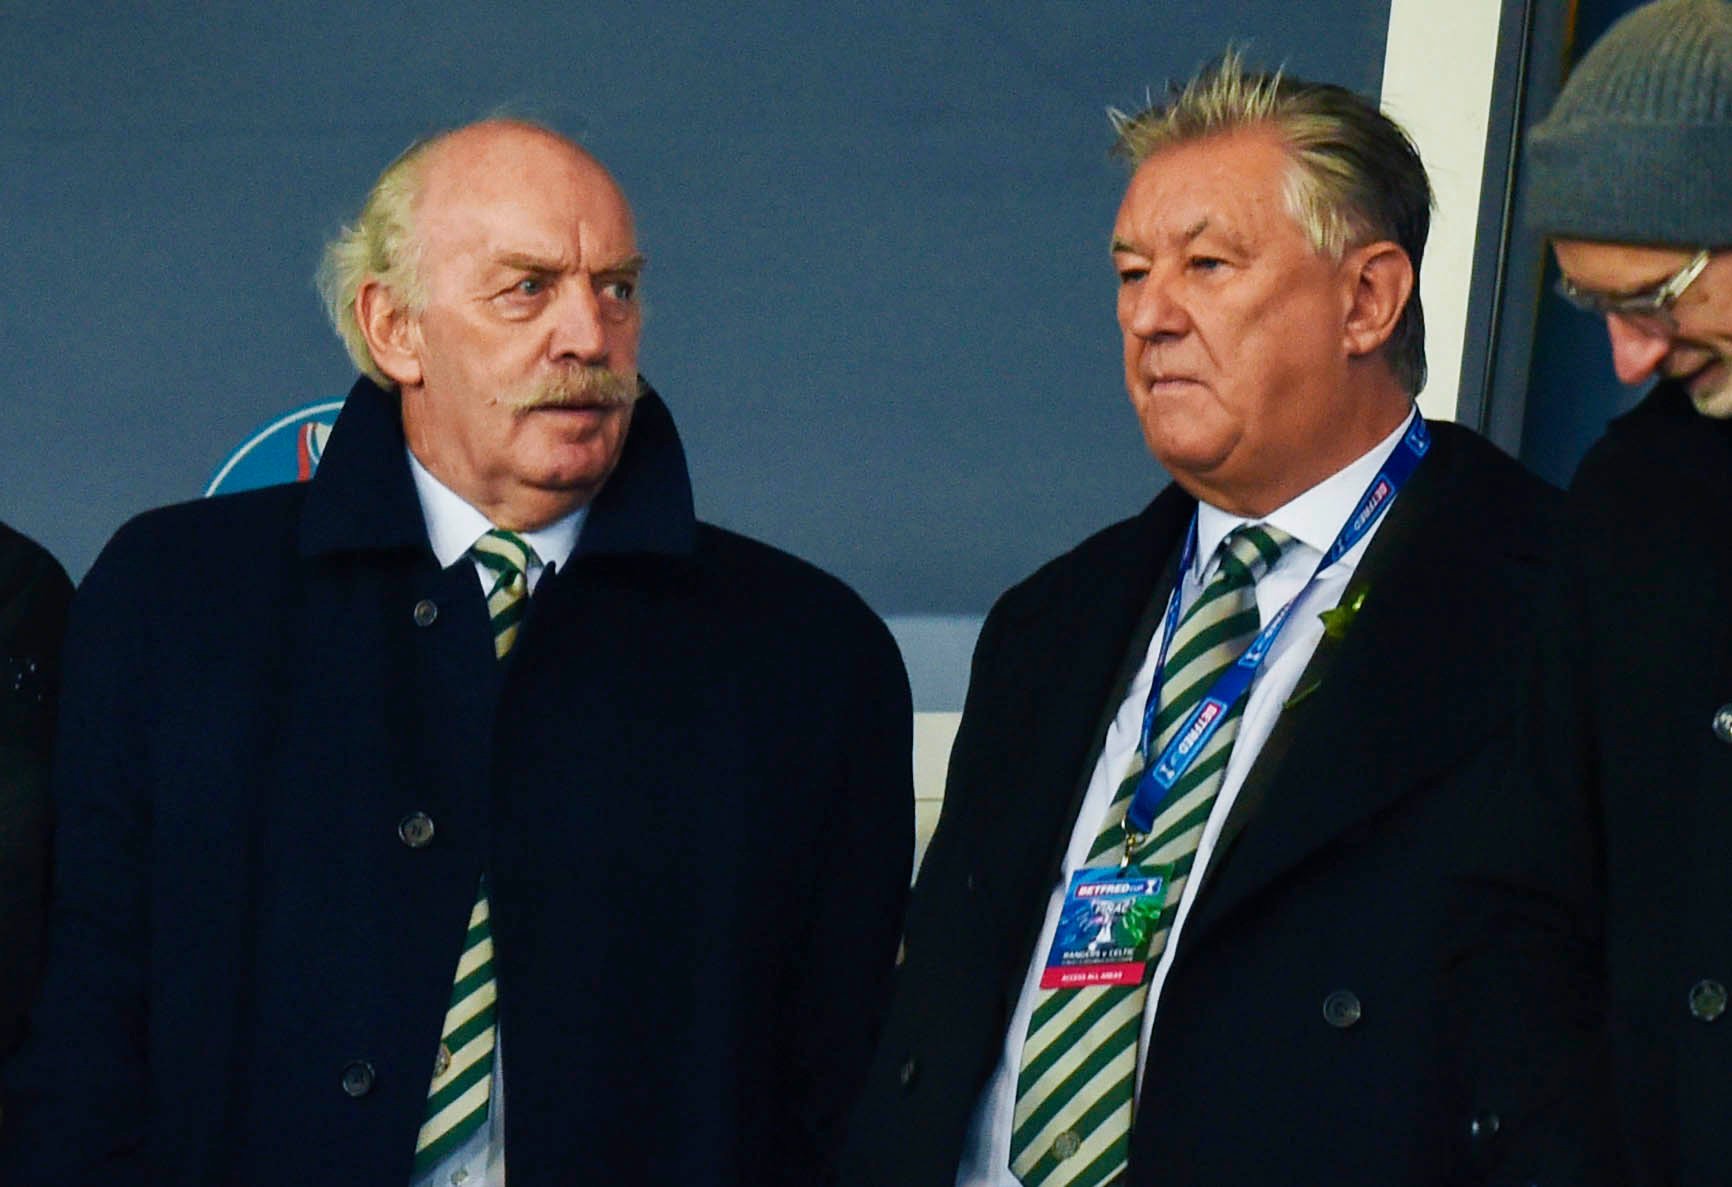 The Celtic silence from Peter Lawwell and Dermot Desmond is untenable